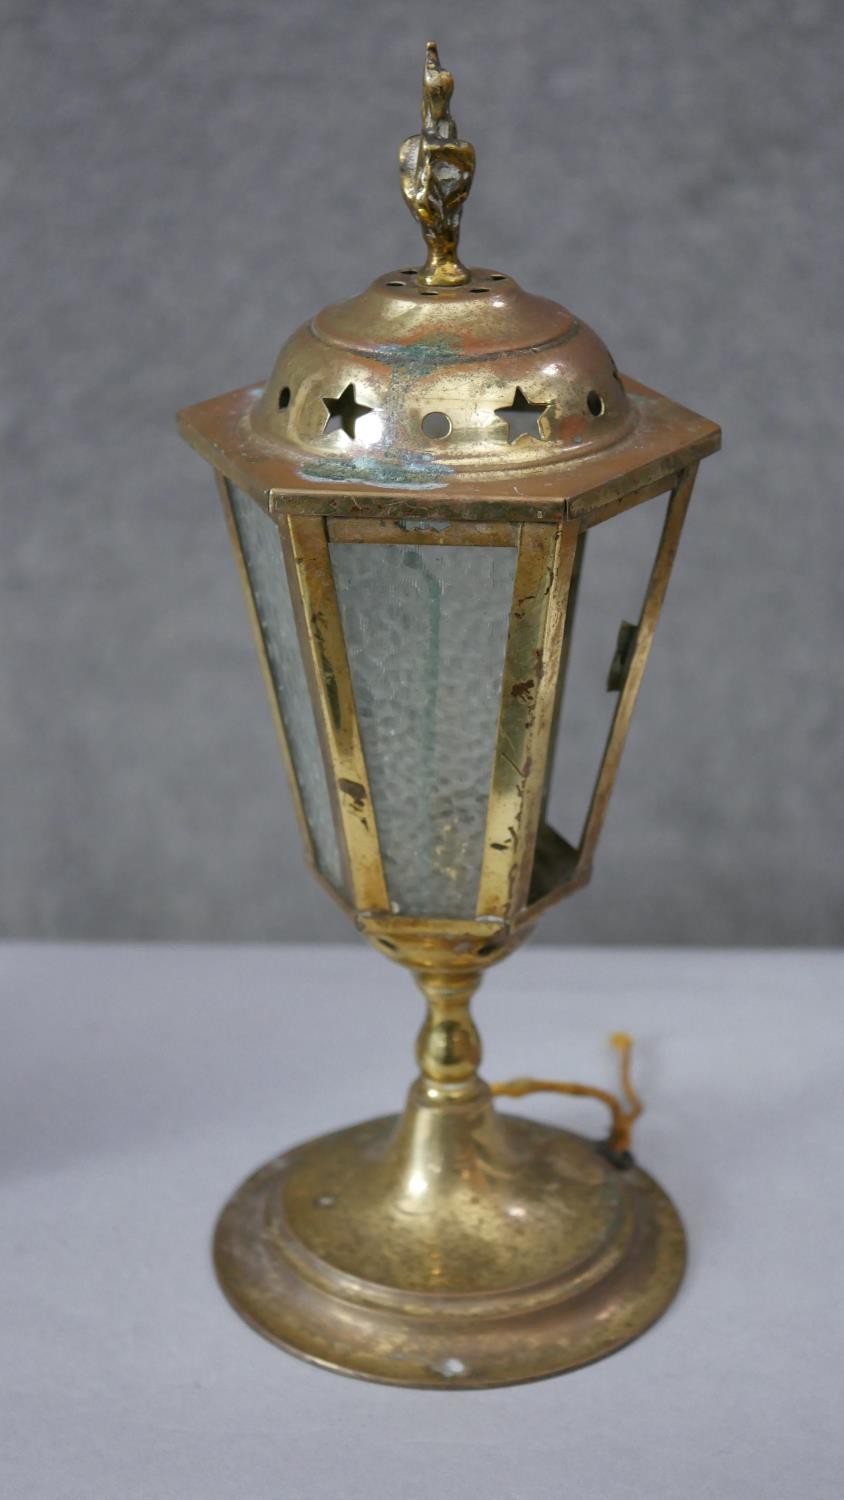 A brass coaching lantern along with a brass oil lamp fitting and gilt metal ormolu mantle clock - Image 3 of 5